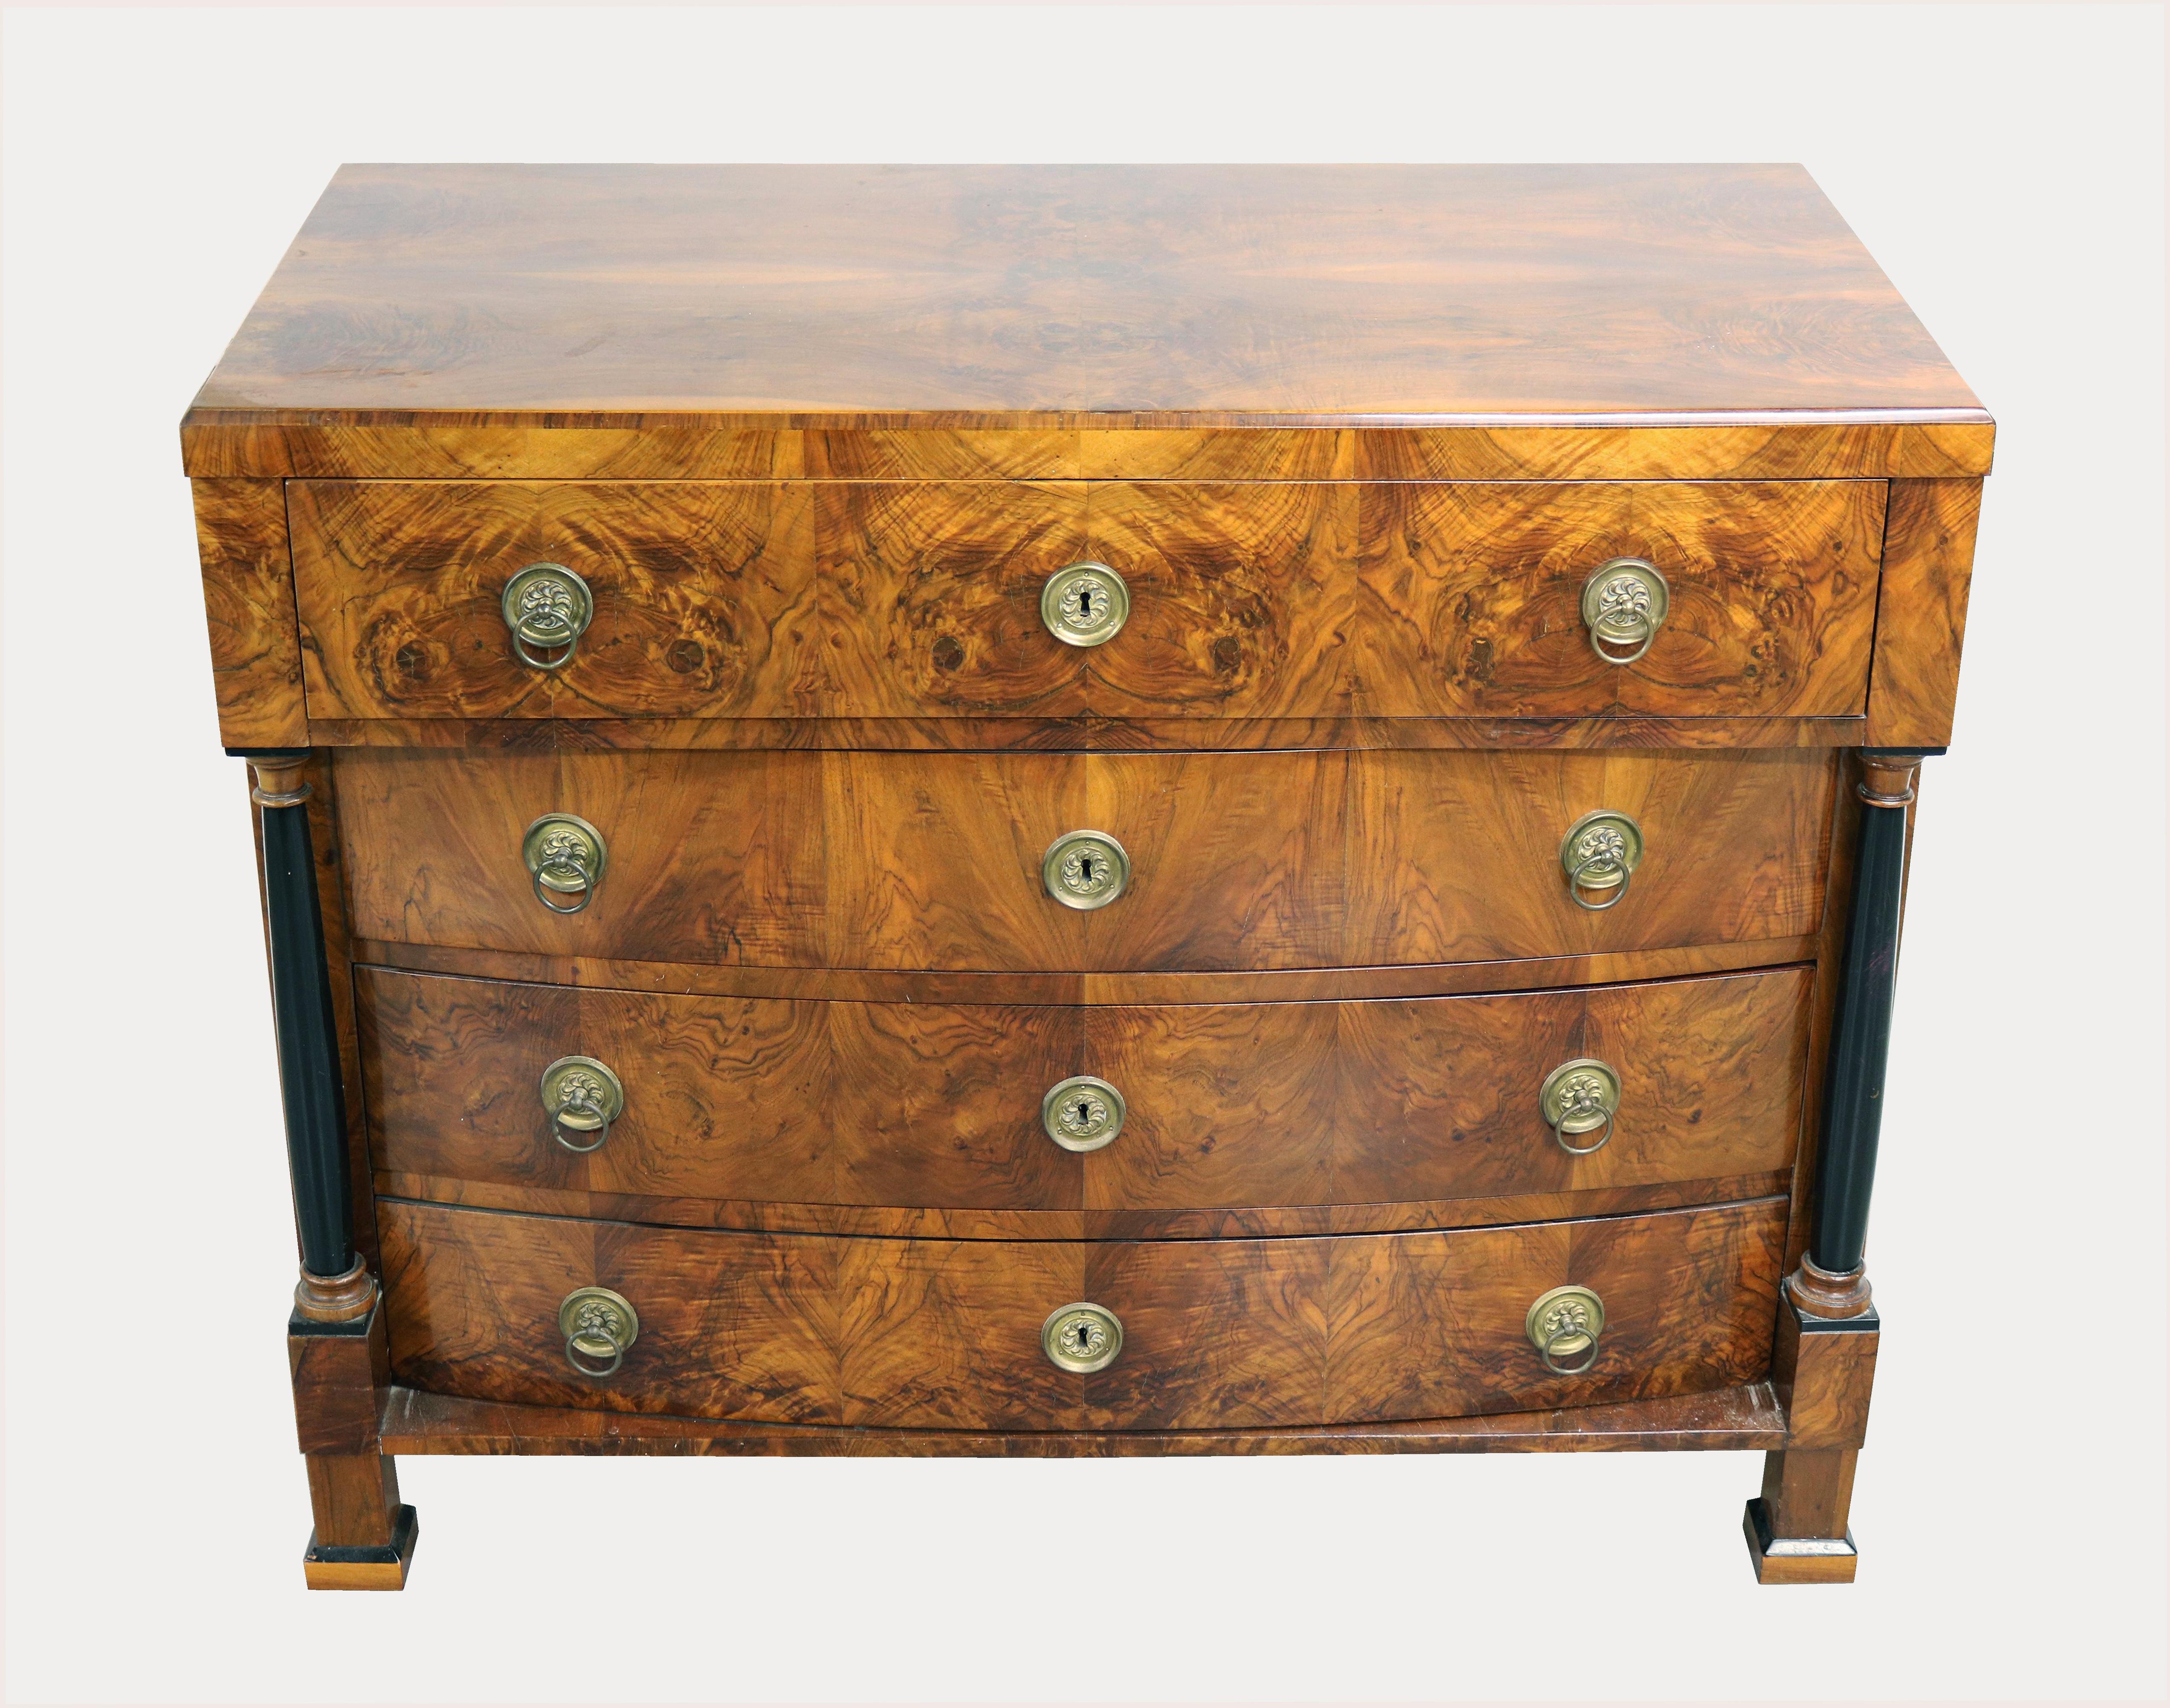 Hello,
This elegant early Biedermeier walnut bureau-commode is the best example of top-quality Viennese piece from circa 1820.

Viennese Biedermeier is distinguished by their sophisticated proportions, rare and refined design and excellent